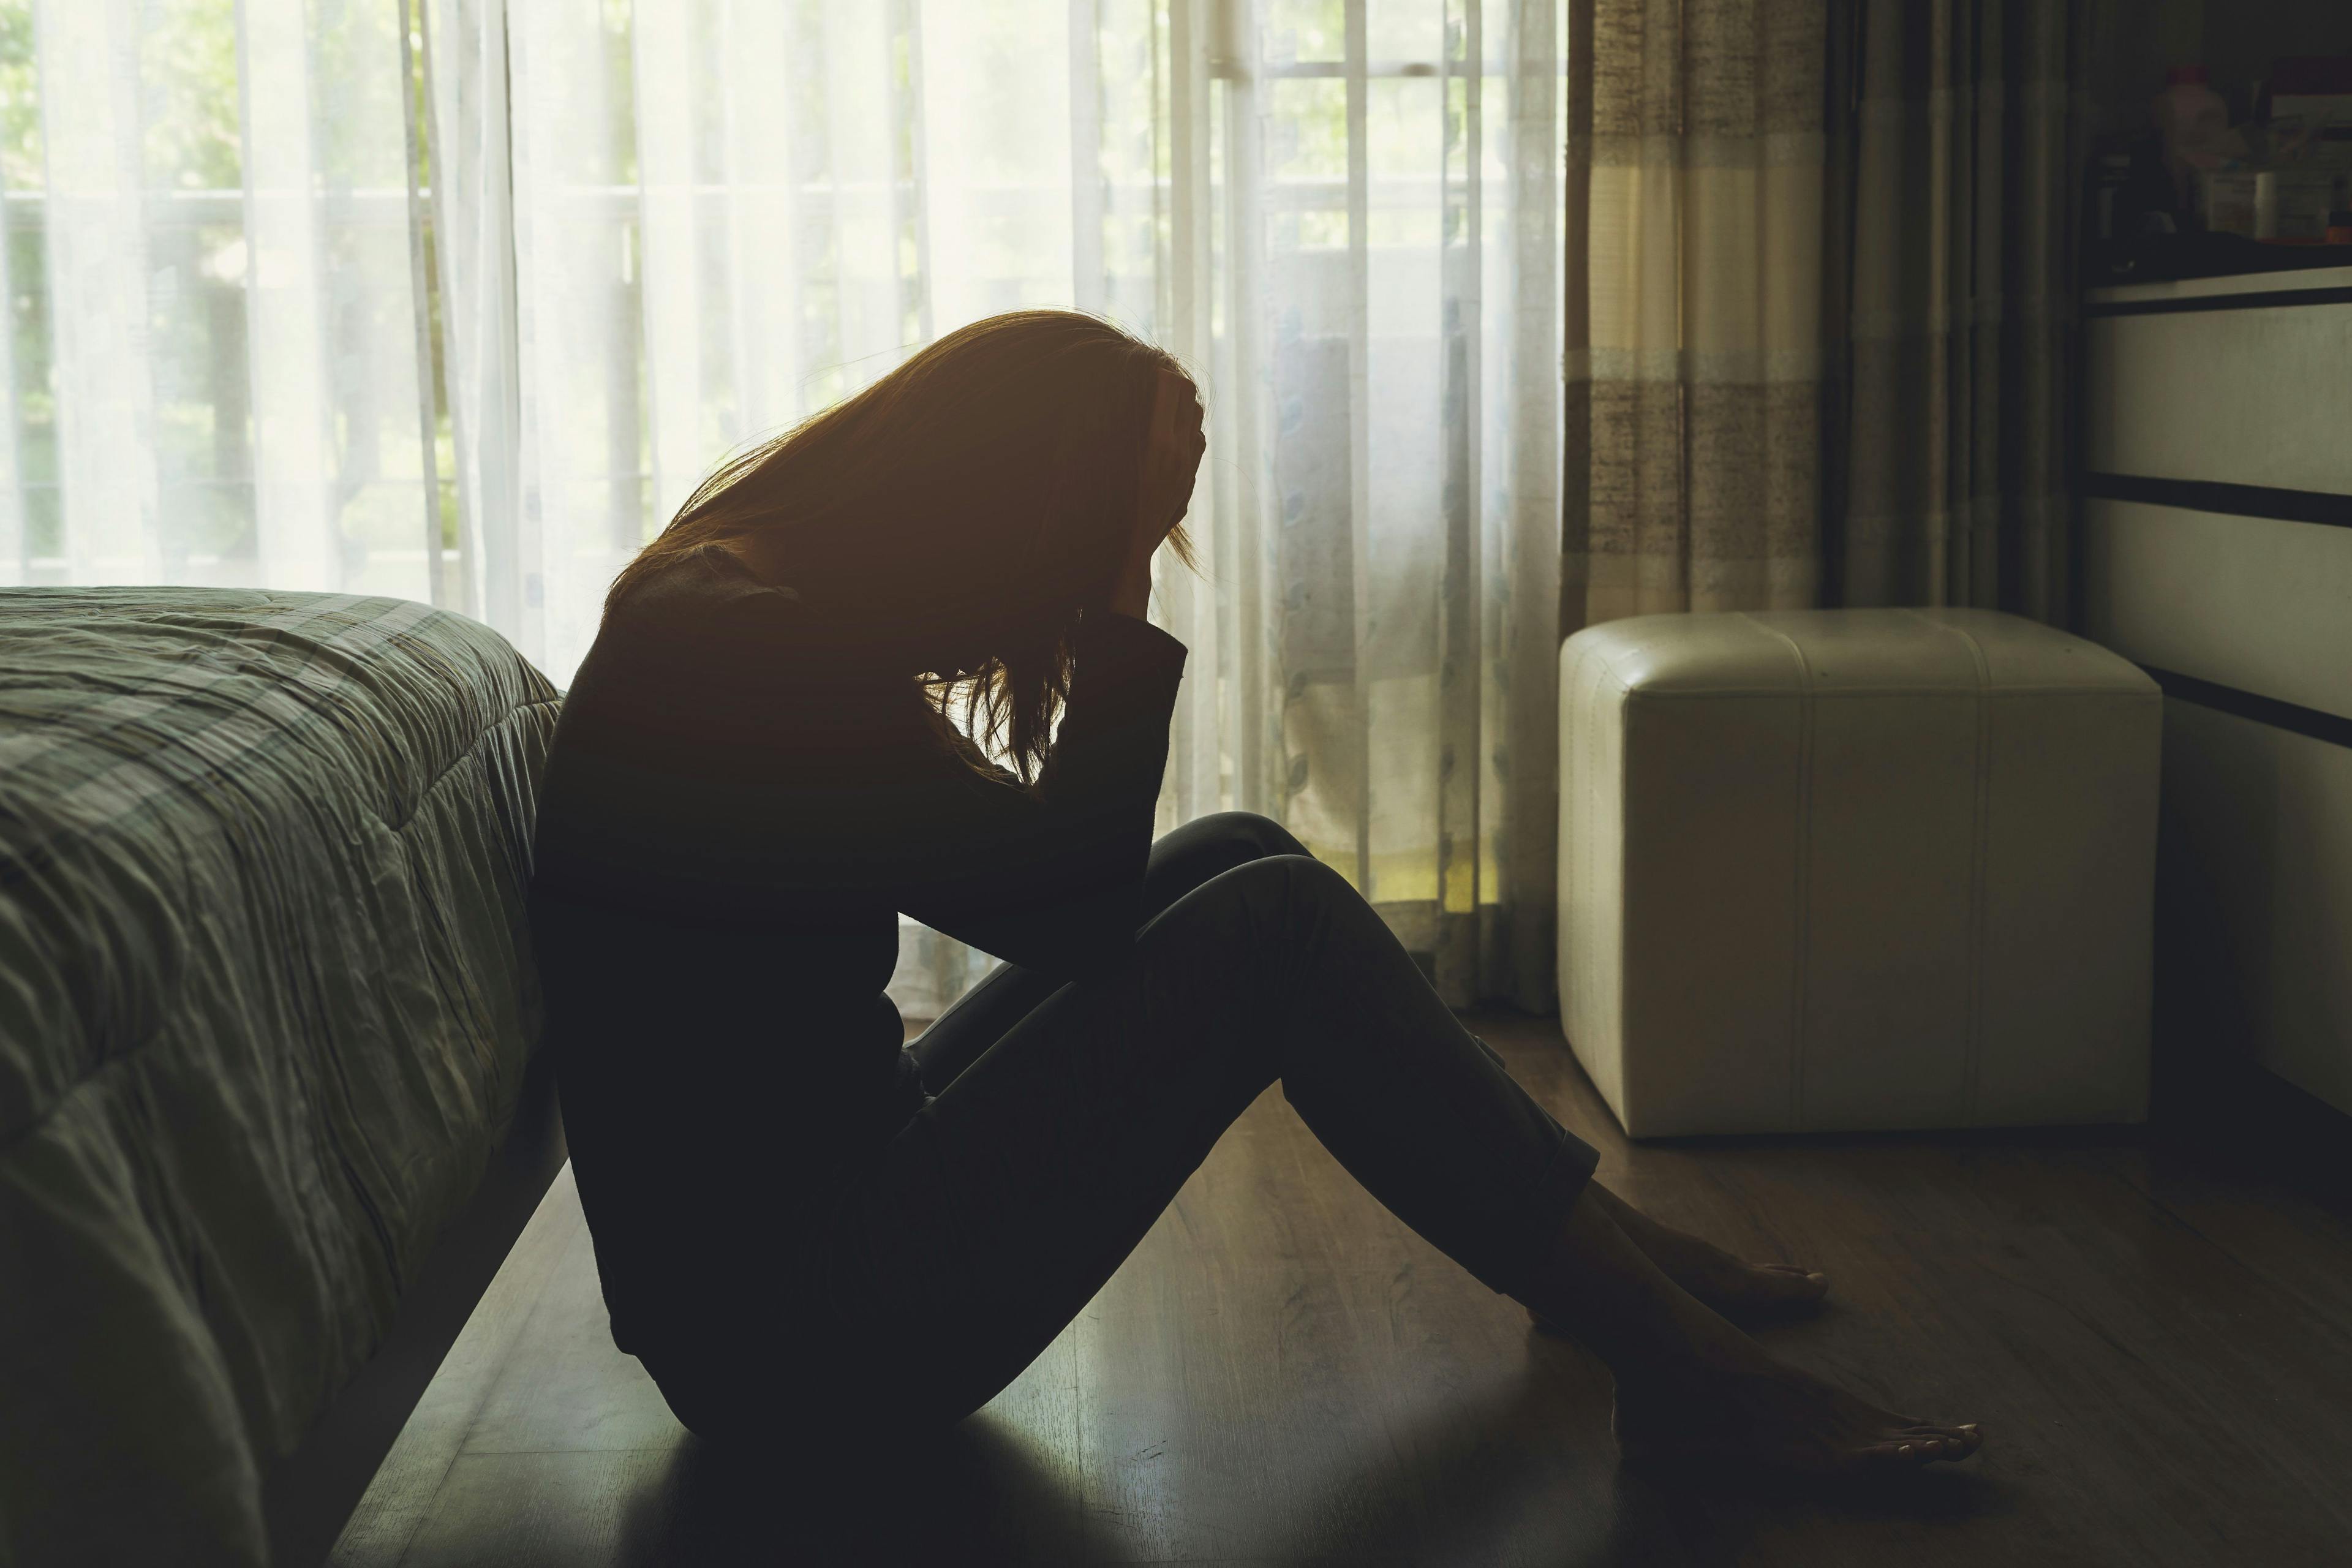 Recognizing and Addressing Domestic Violence: Issues for Psychiatrists